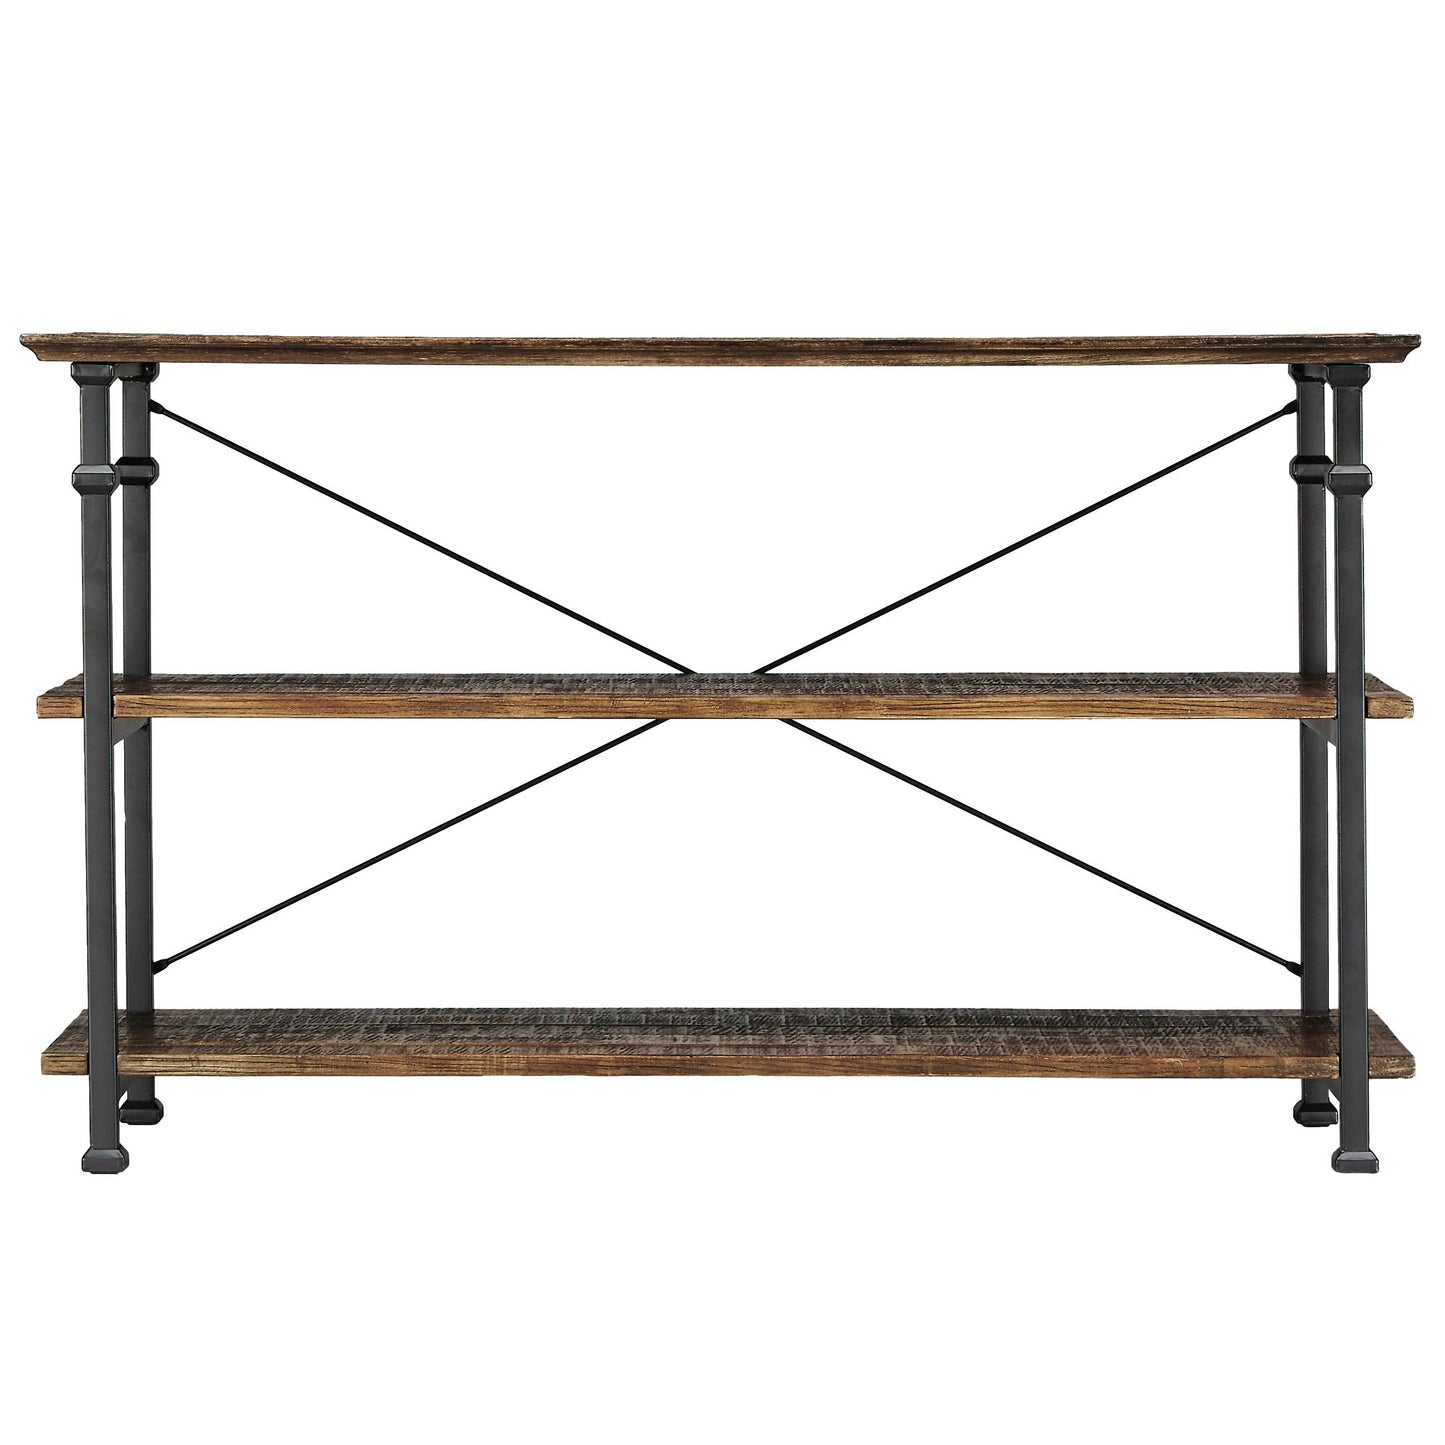 Vintage Industrial TV Stand - Brown Finish